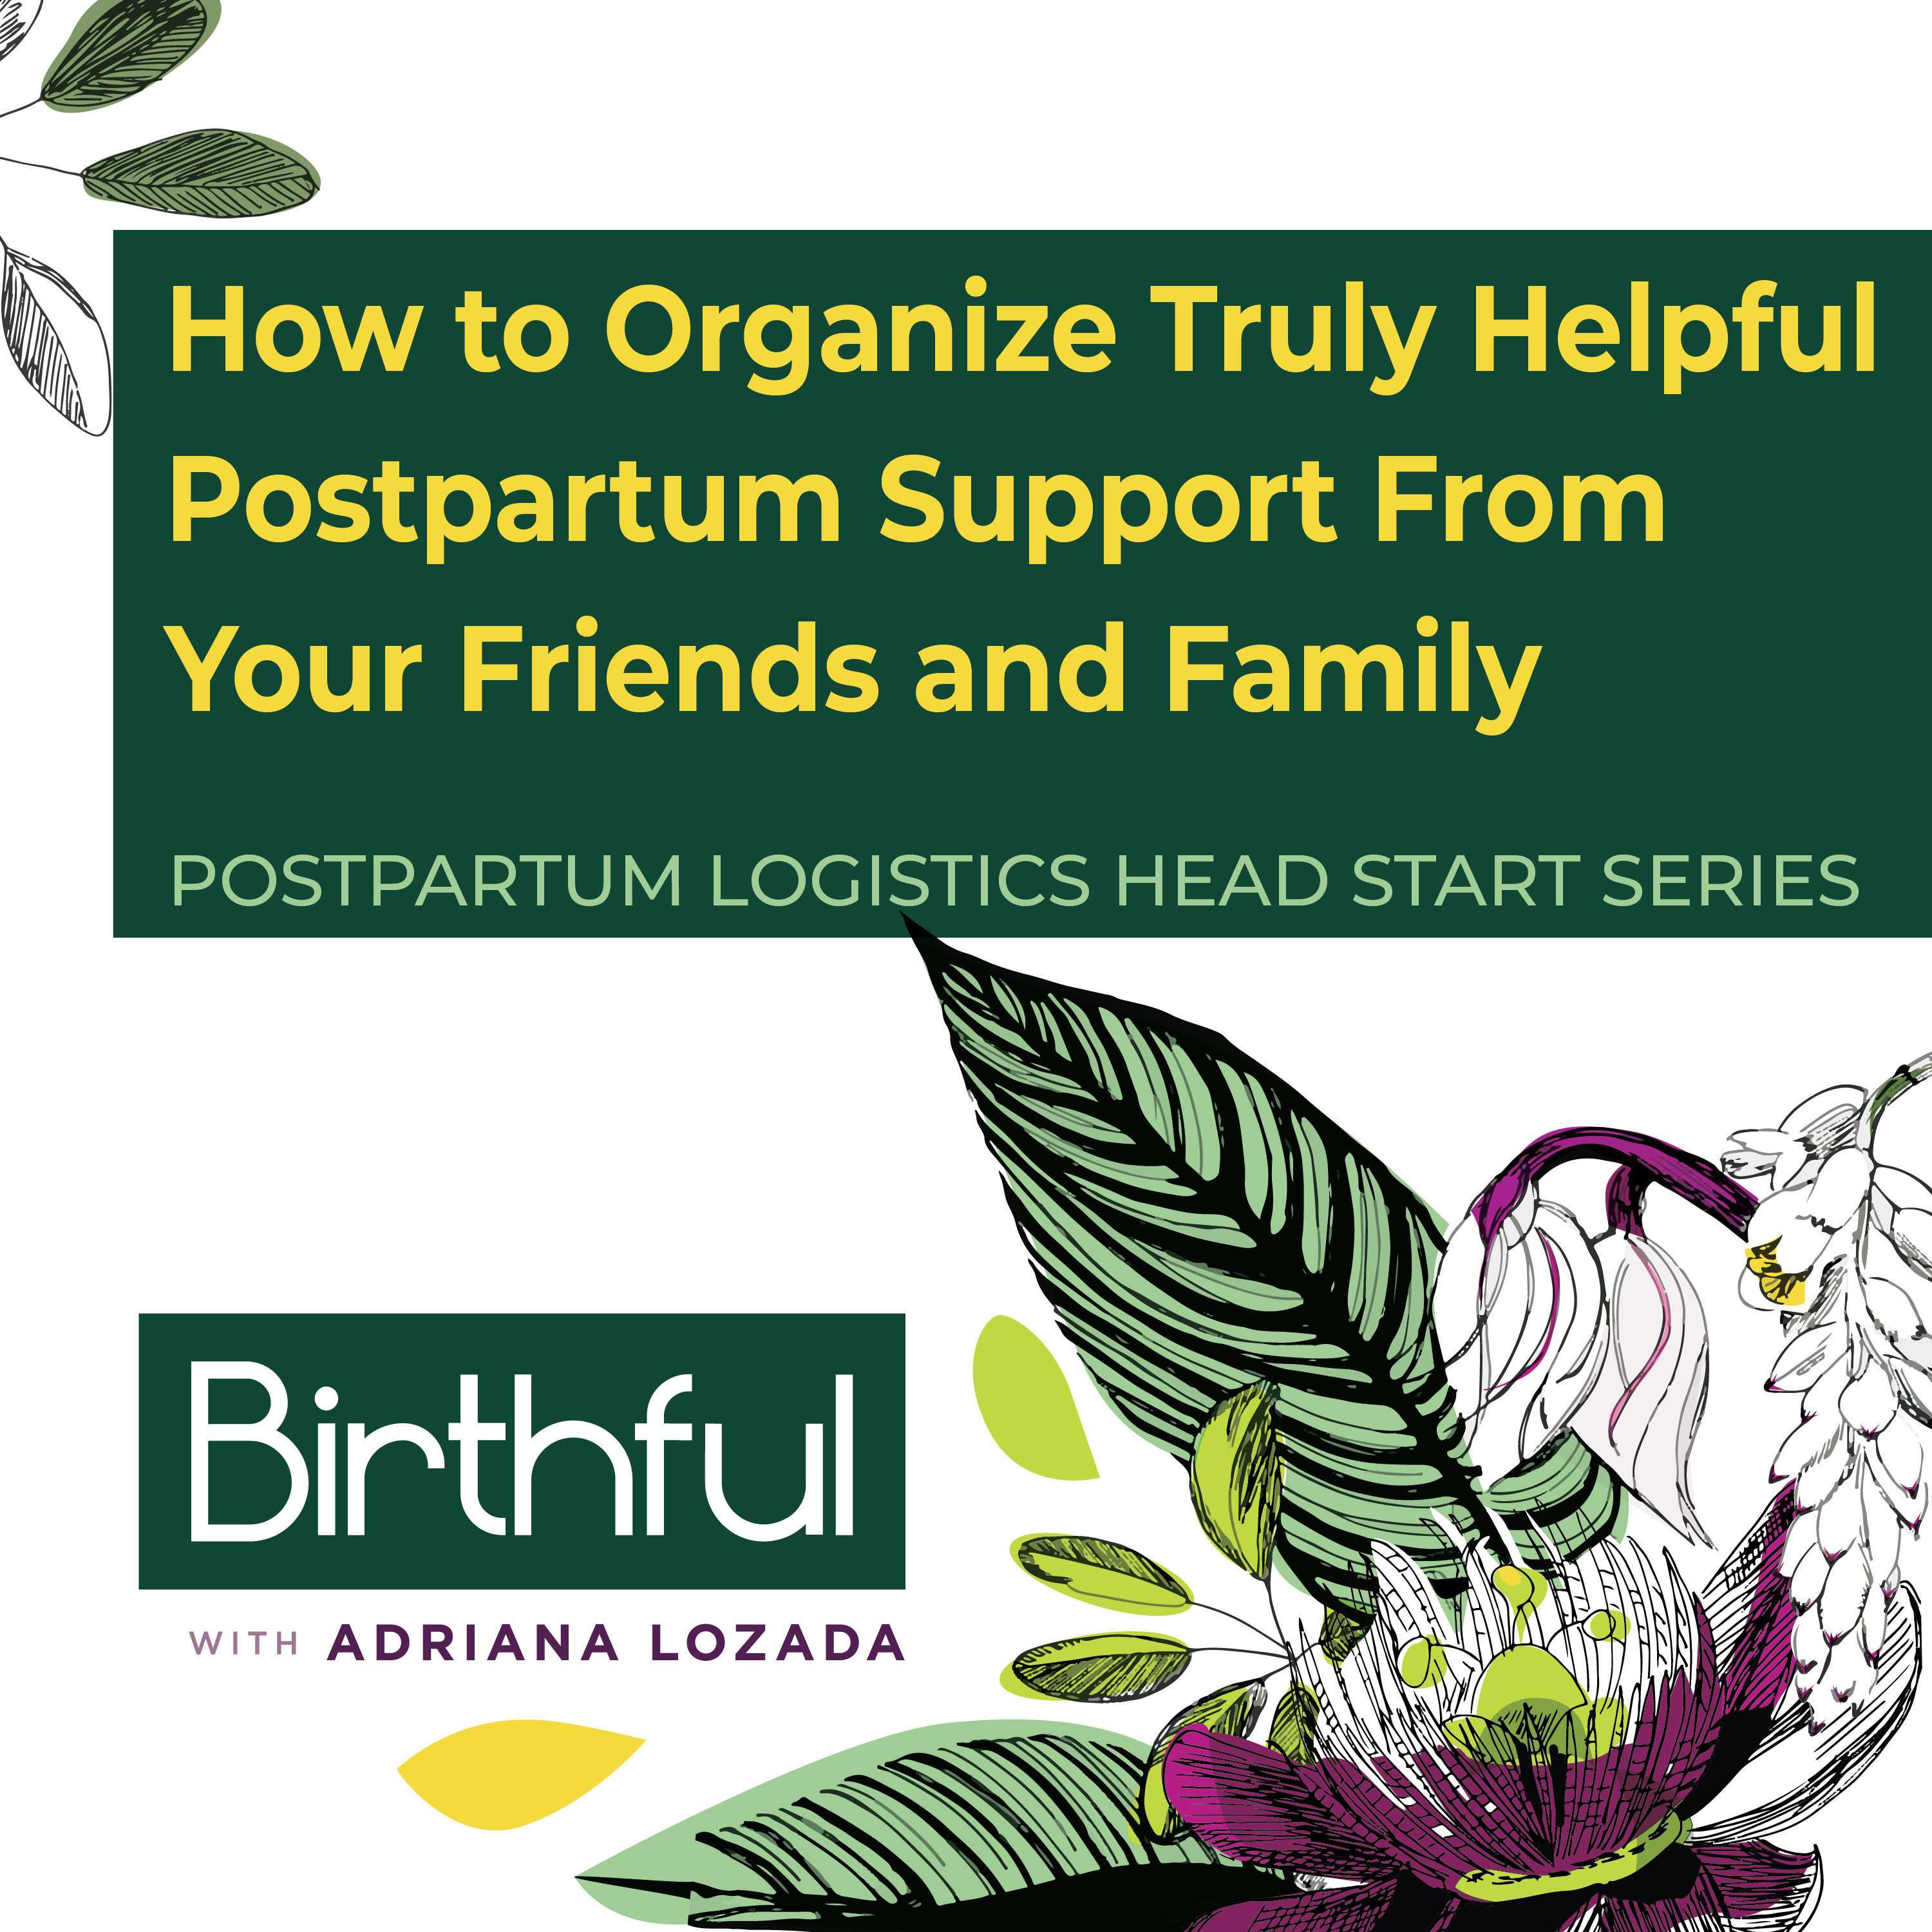 How to Organize Truly Helpful Postpartum Support From Your Friends and Family